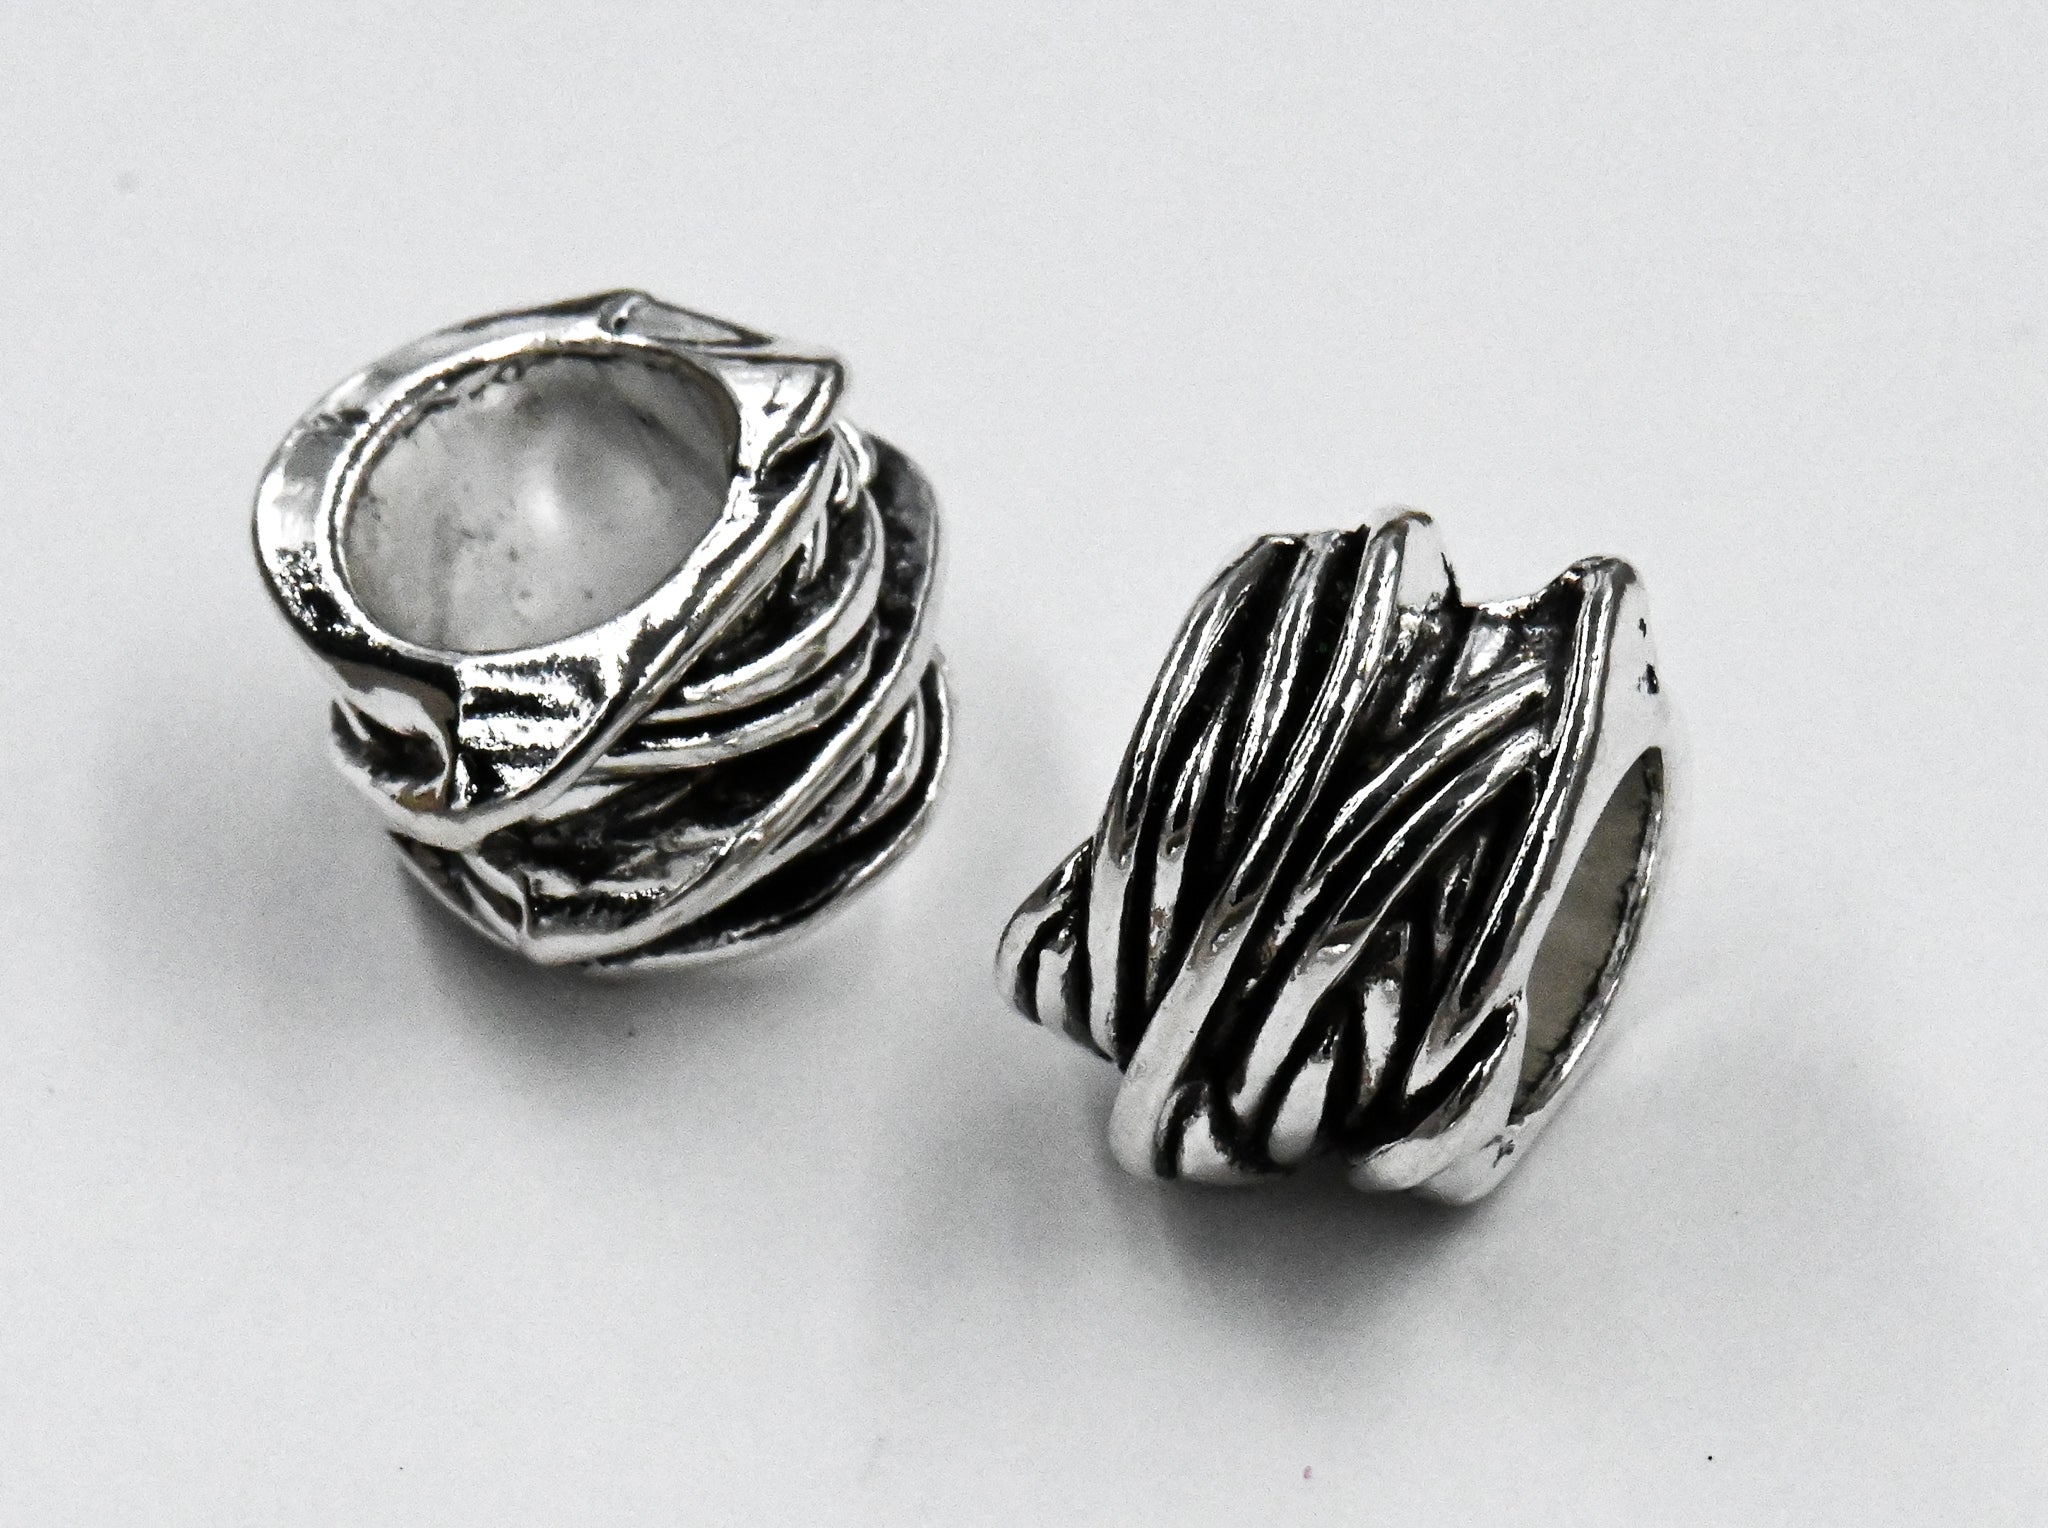 Swirl Wrap 10pc Large Hole beads Antique Silver or Antique Gold Asymmetrical Spacer